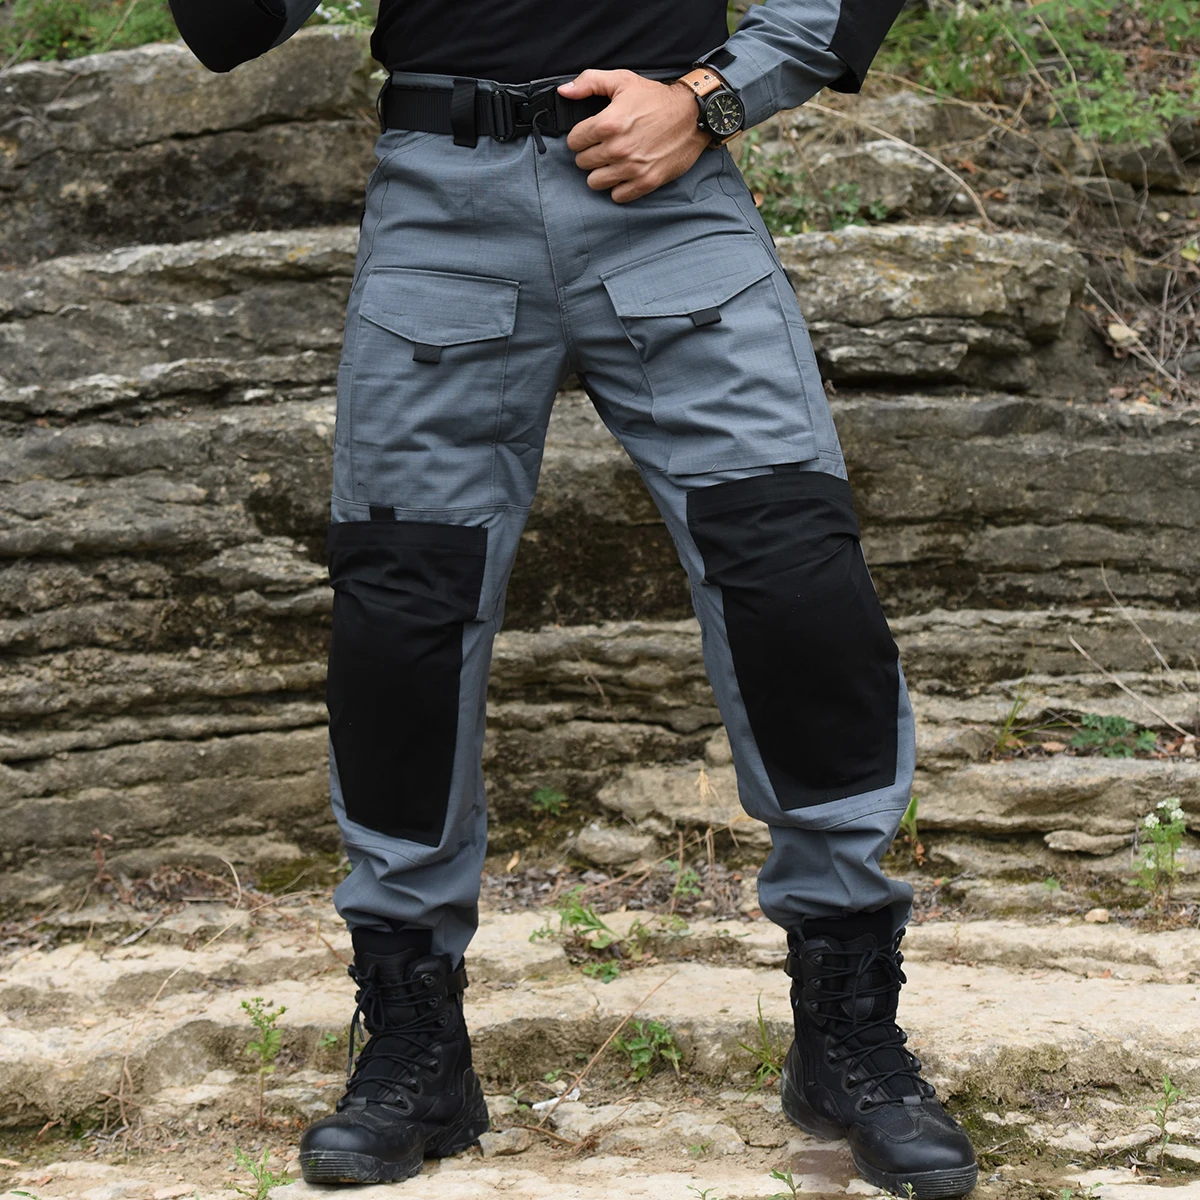 Tactical Pants Military US Army Cargo Pants Work Clothes Combat Uniform Paintball Multi Pockets Men Clothing Camping Waterproof